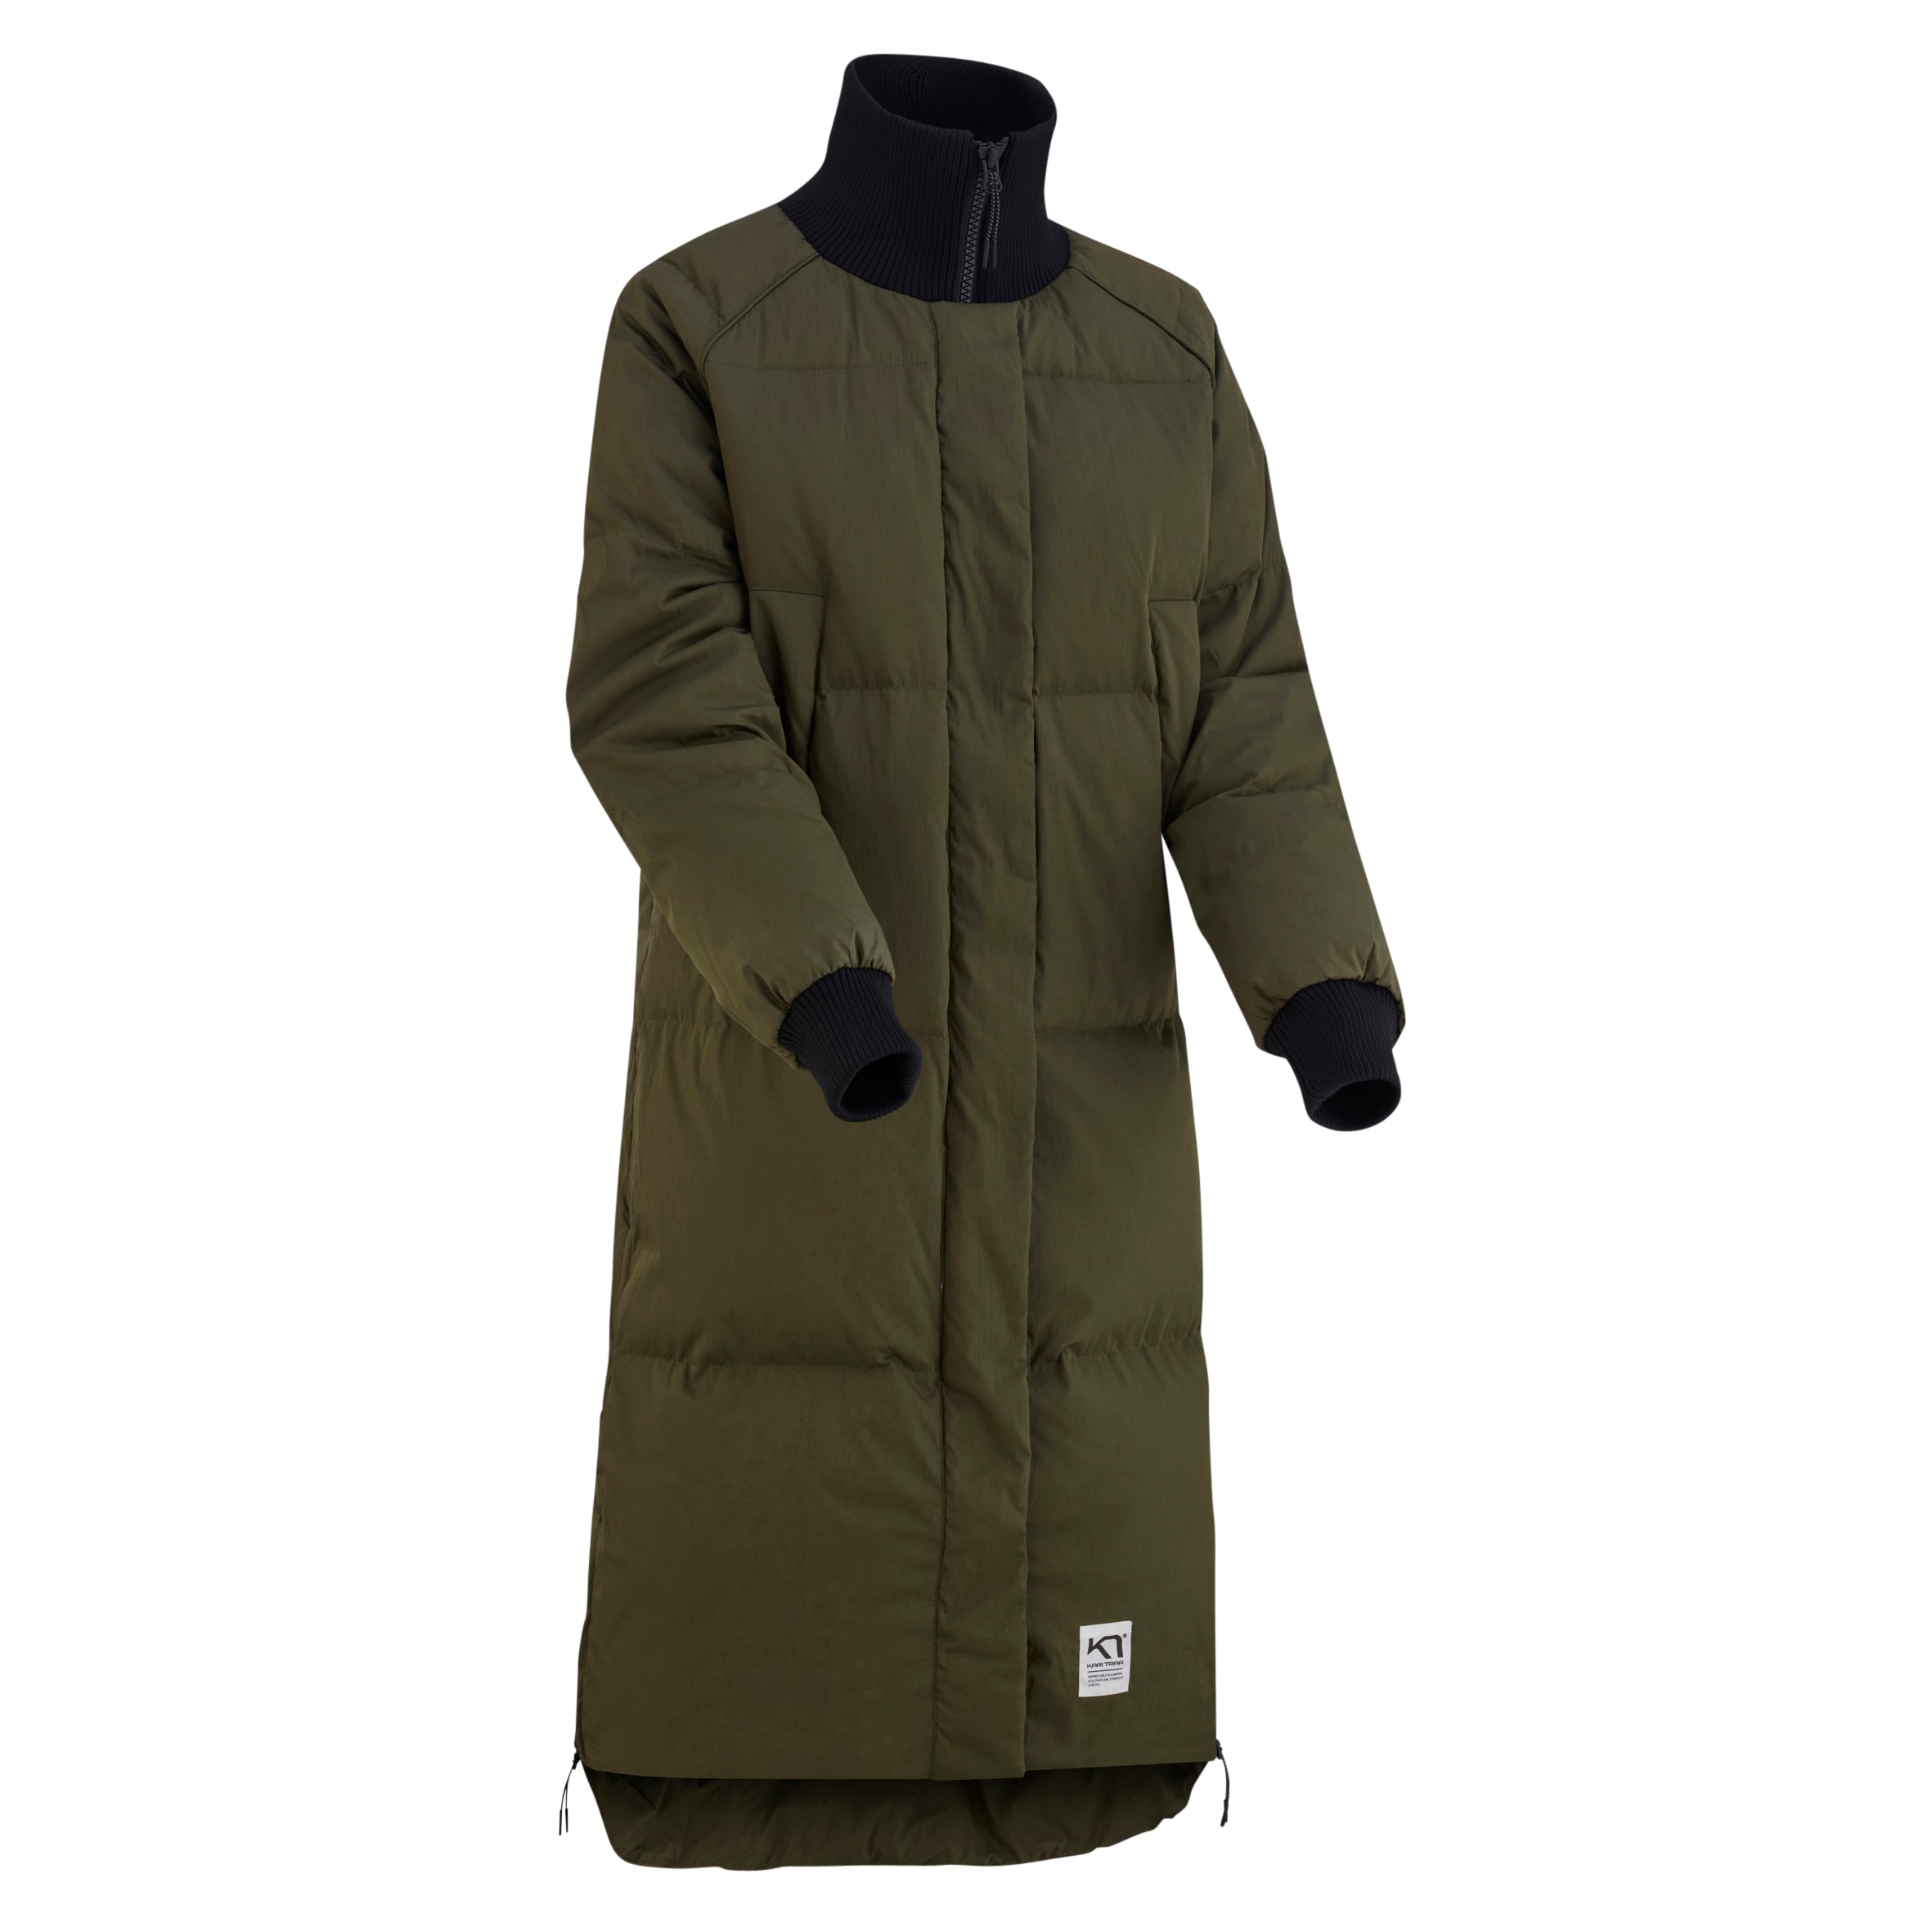 Buy Kari Traa Olde Parka from Outnorth